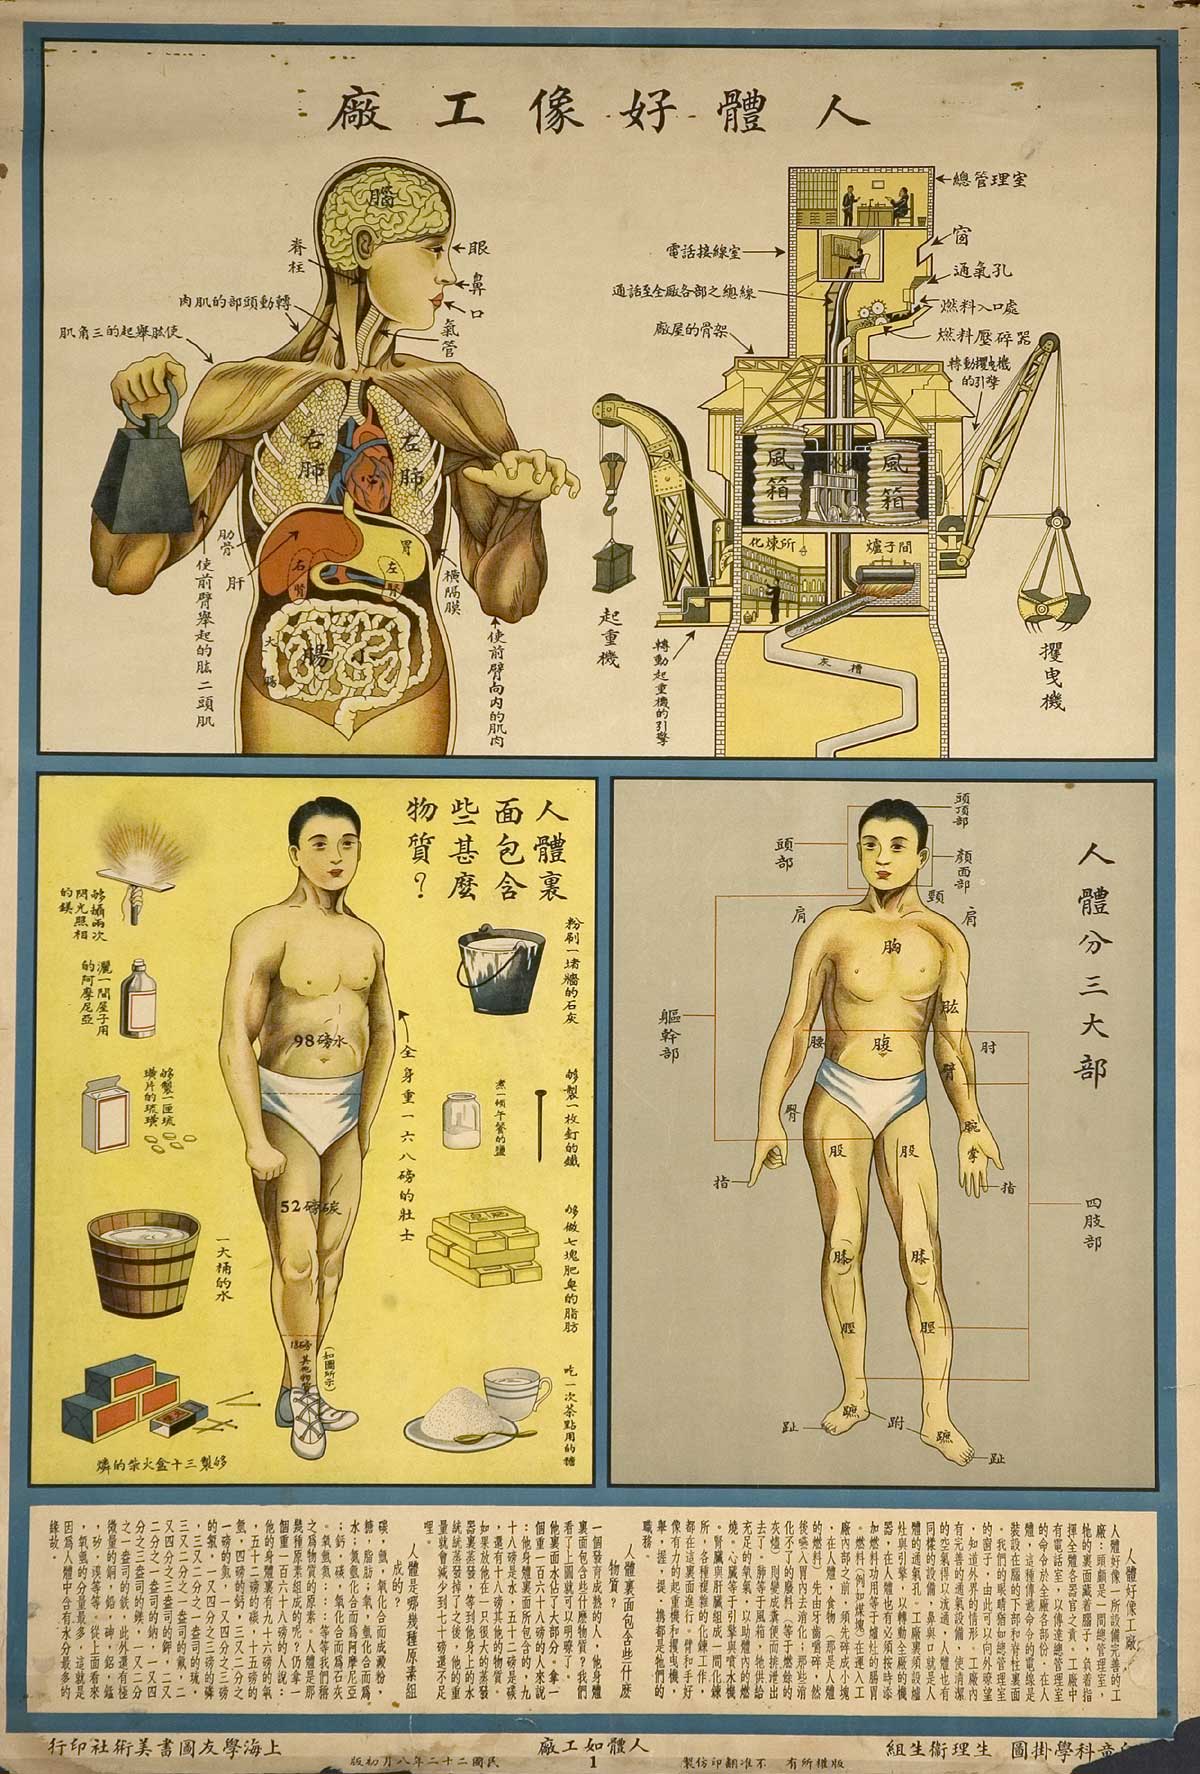 Chinese Public Health Posters | MetaFilter